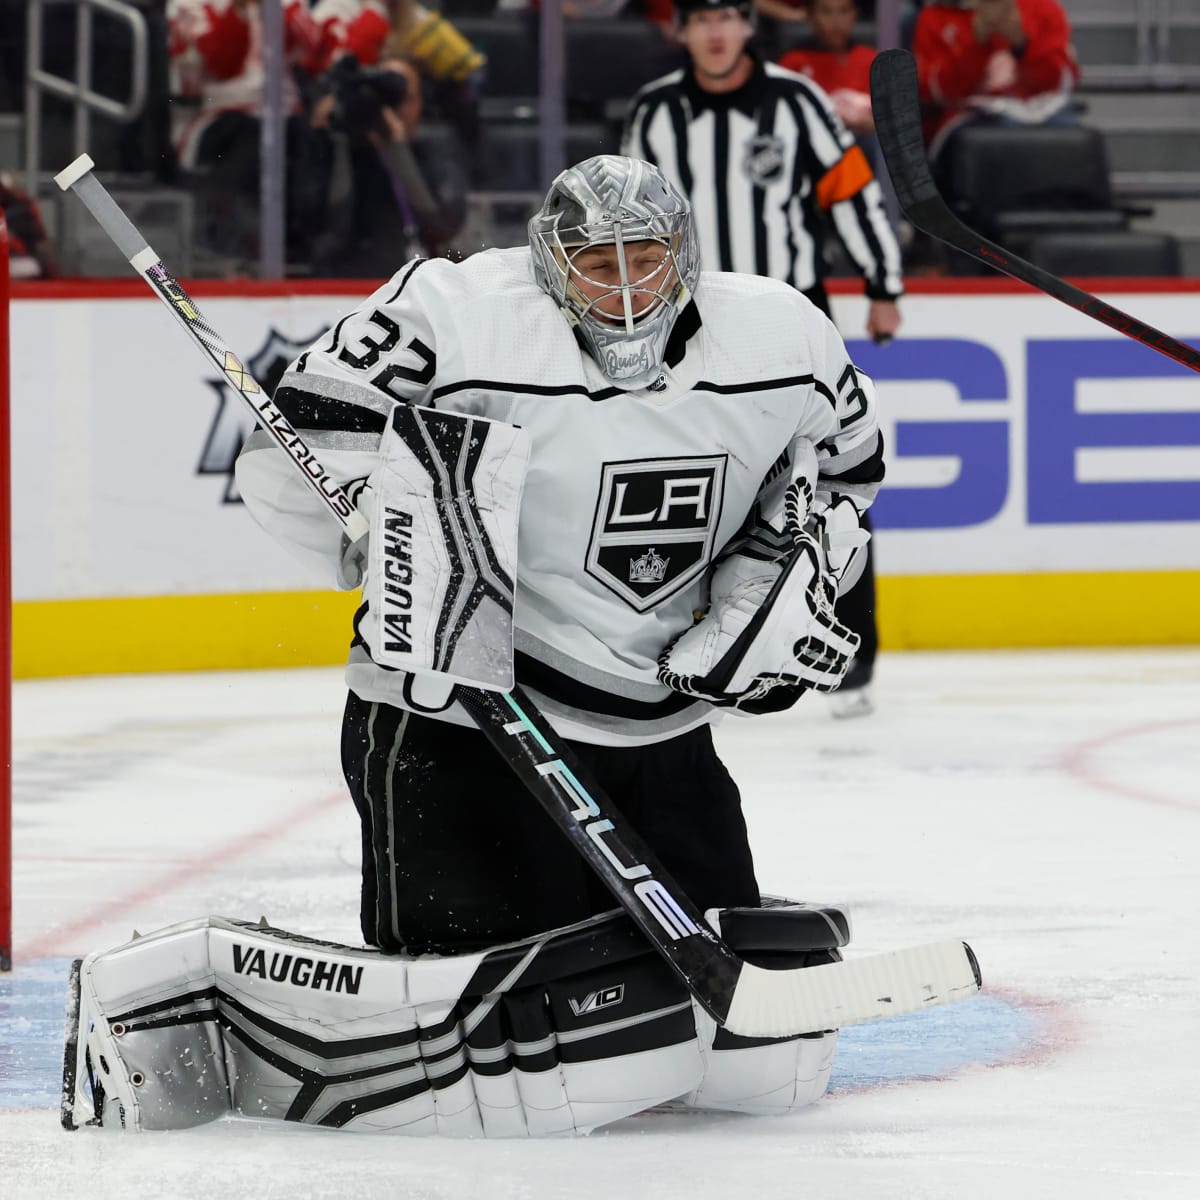 t hold on to their two-goal lead, as the Los Angeles Kings clinched